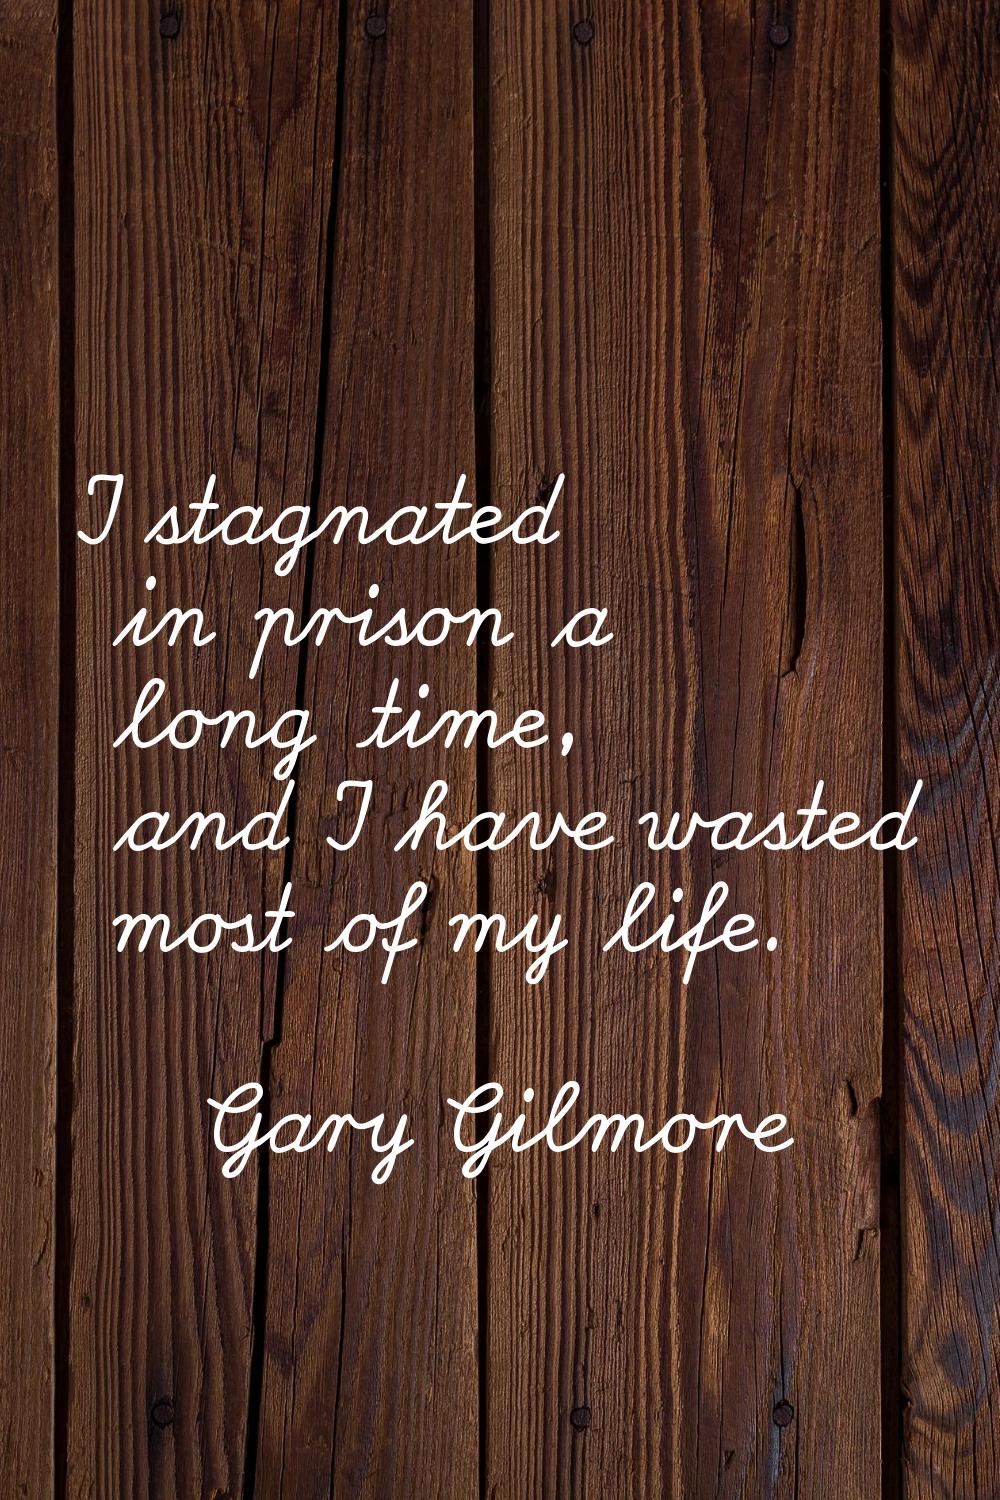 I stagnated in prison a long time, and I have wasted most of my life.